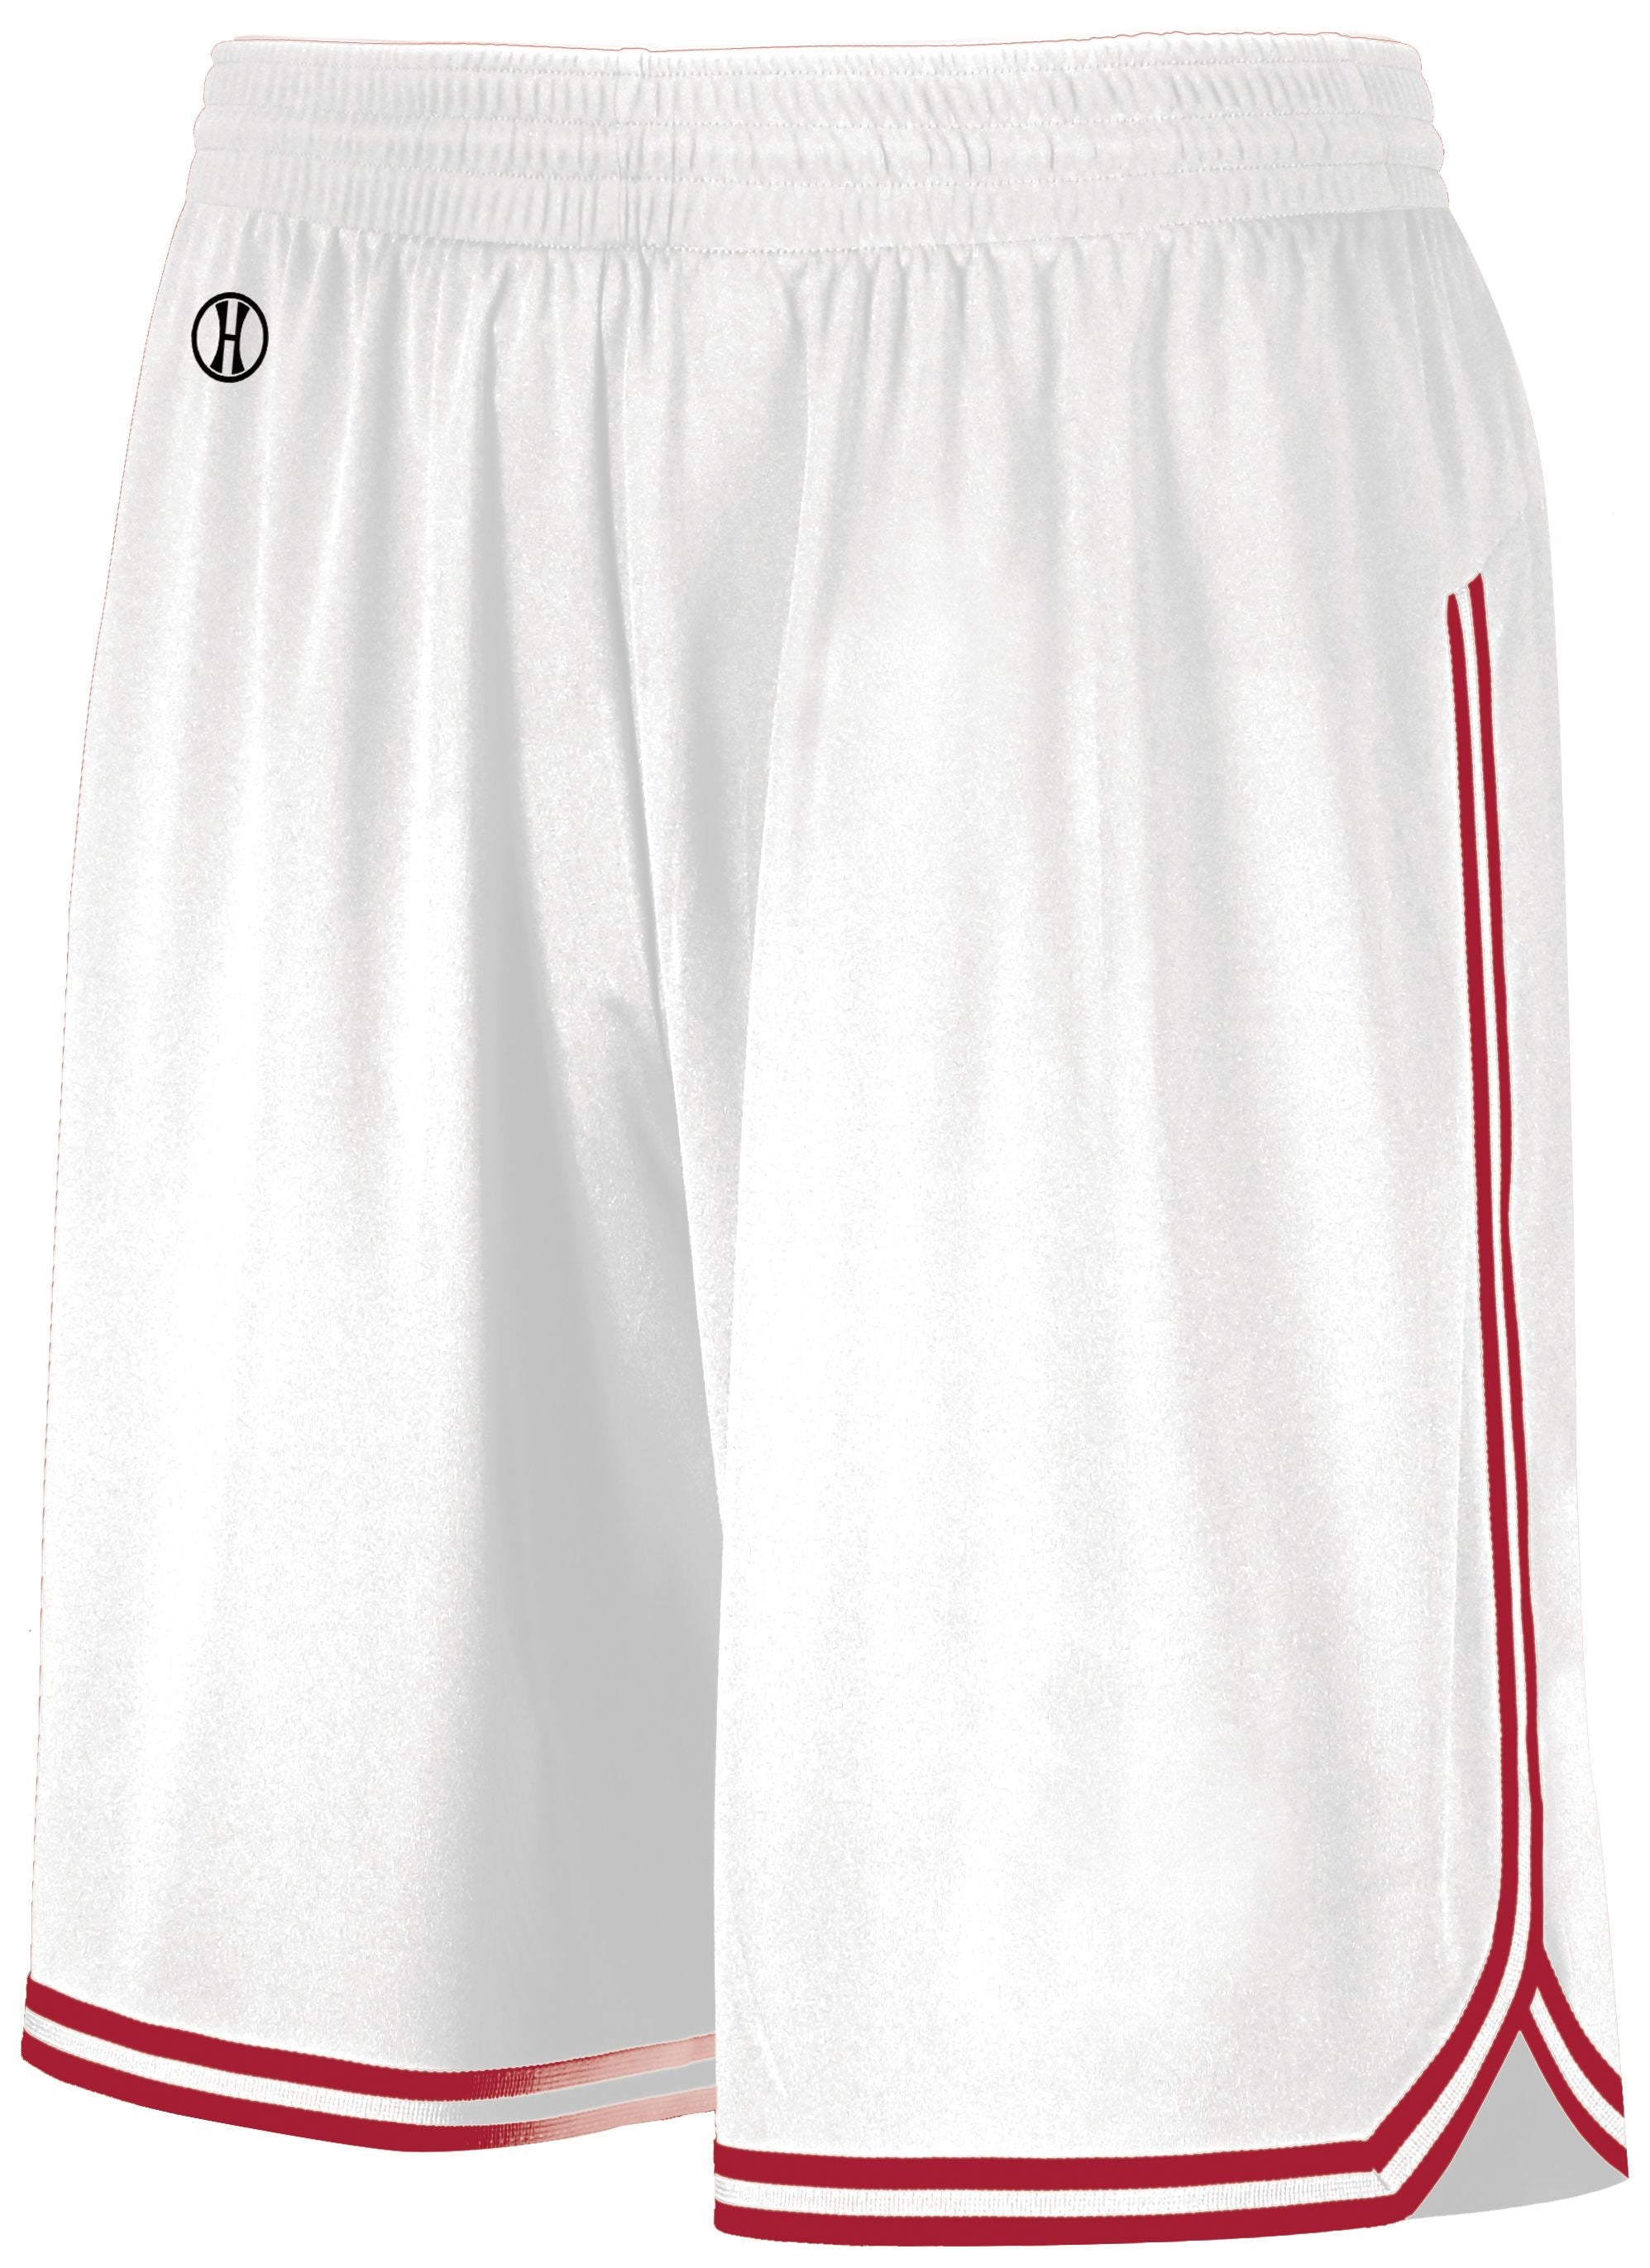 Holloway Retro Basketball Shorts in White/Scarlet  -Part of the Adult, Adult-Shorts, Basketball, Holloway, All-Sports, All-Sports-1 product lines at KanaleyCreations.com